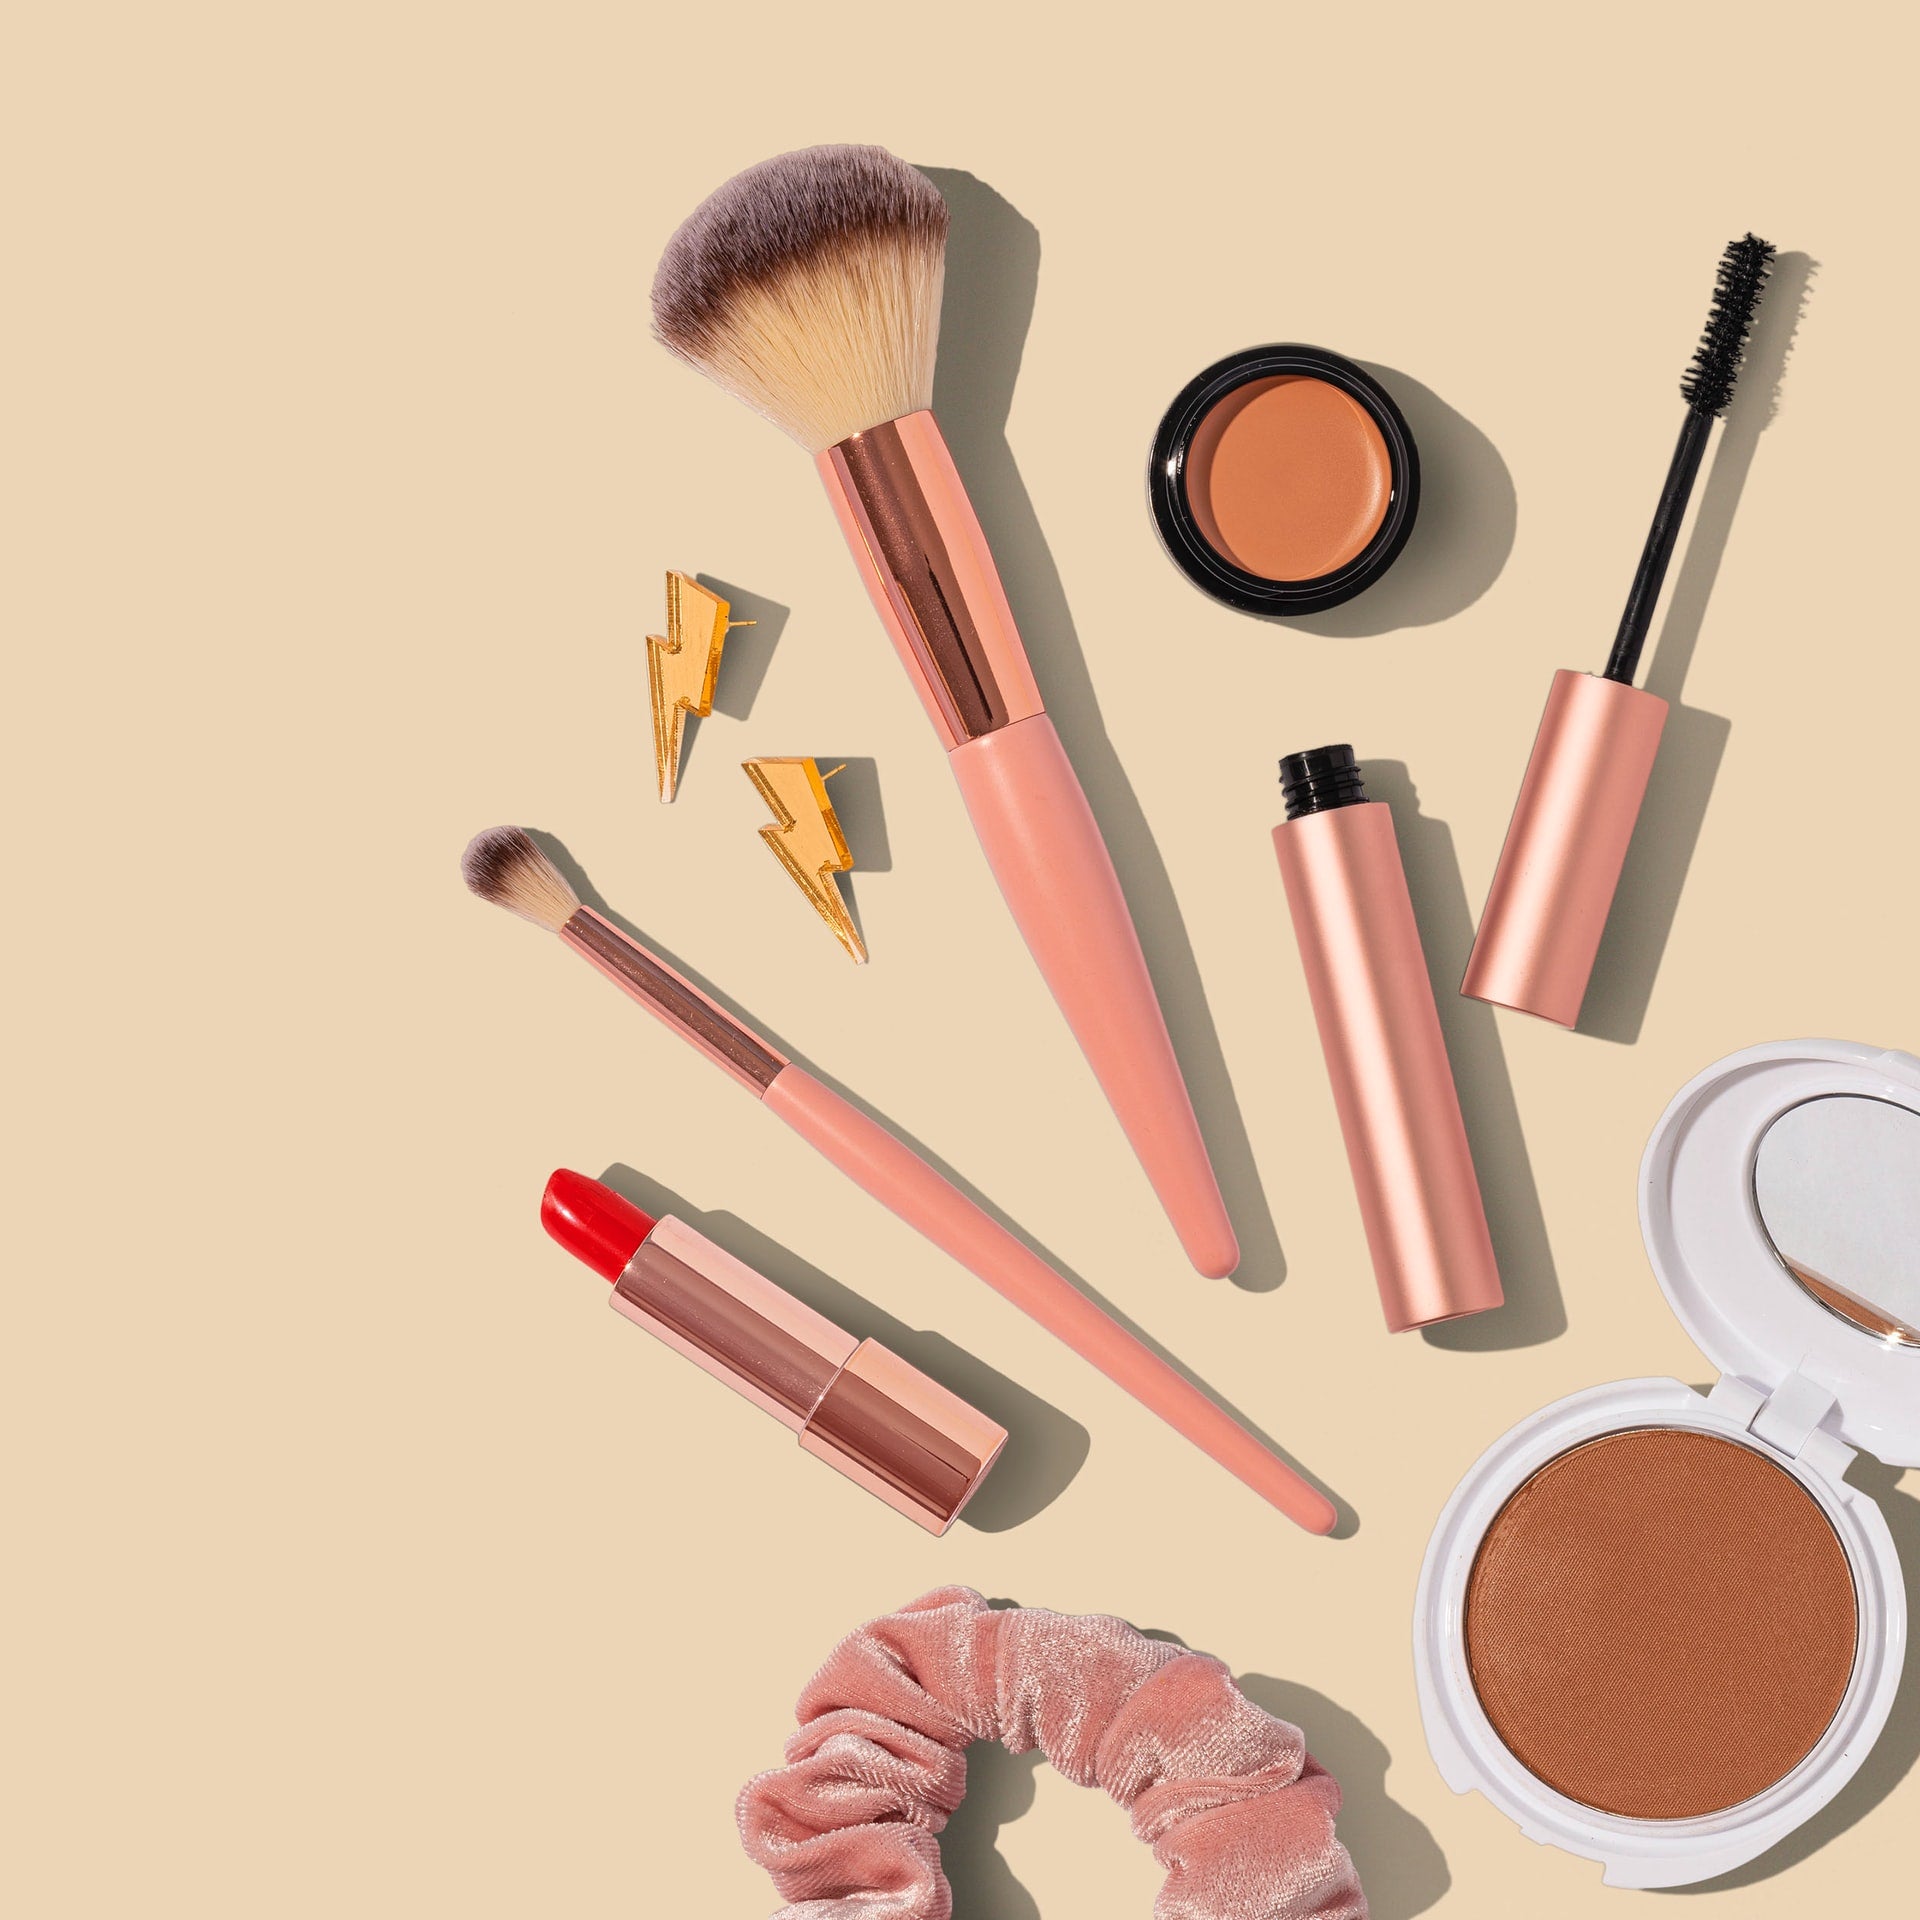 Best brushes to use right now